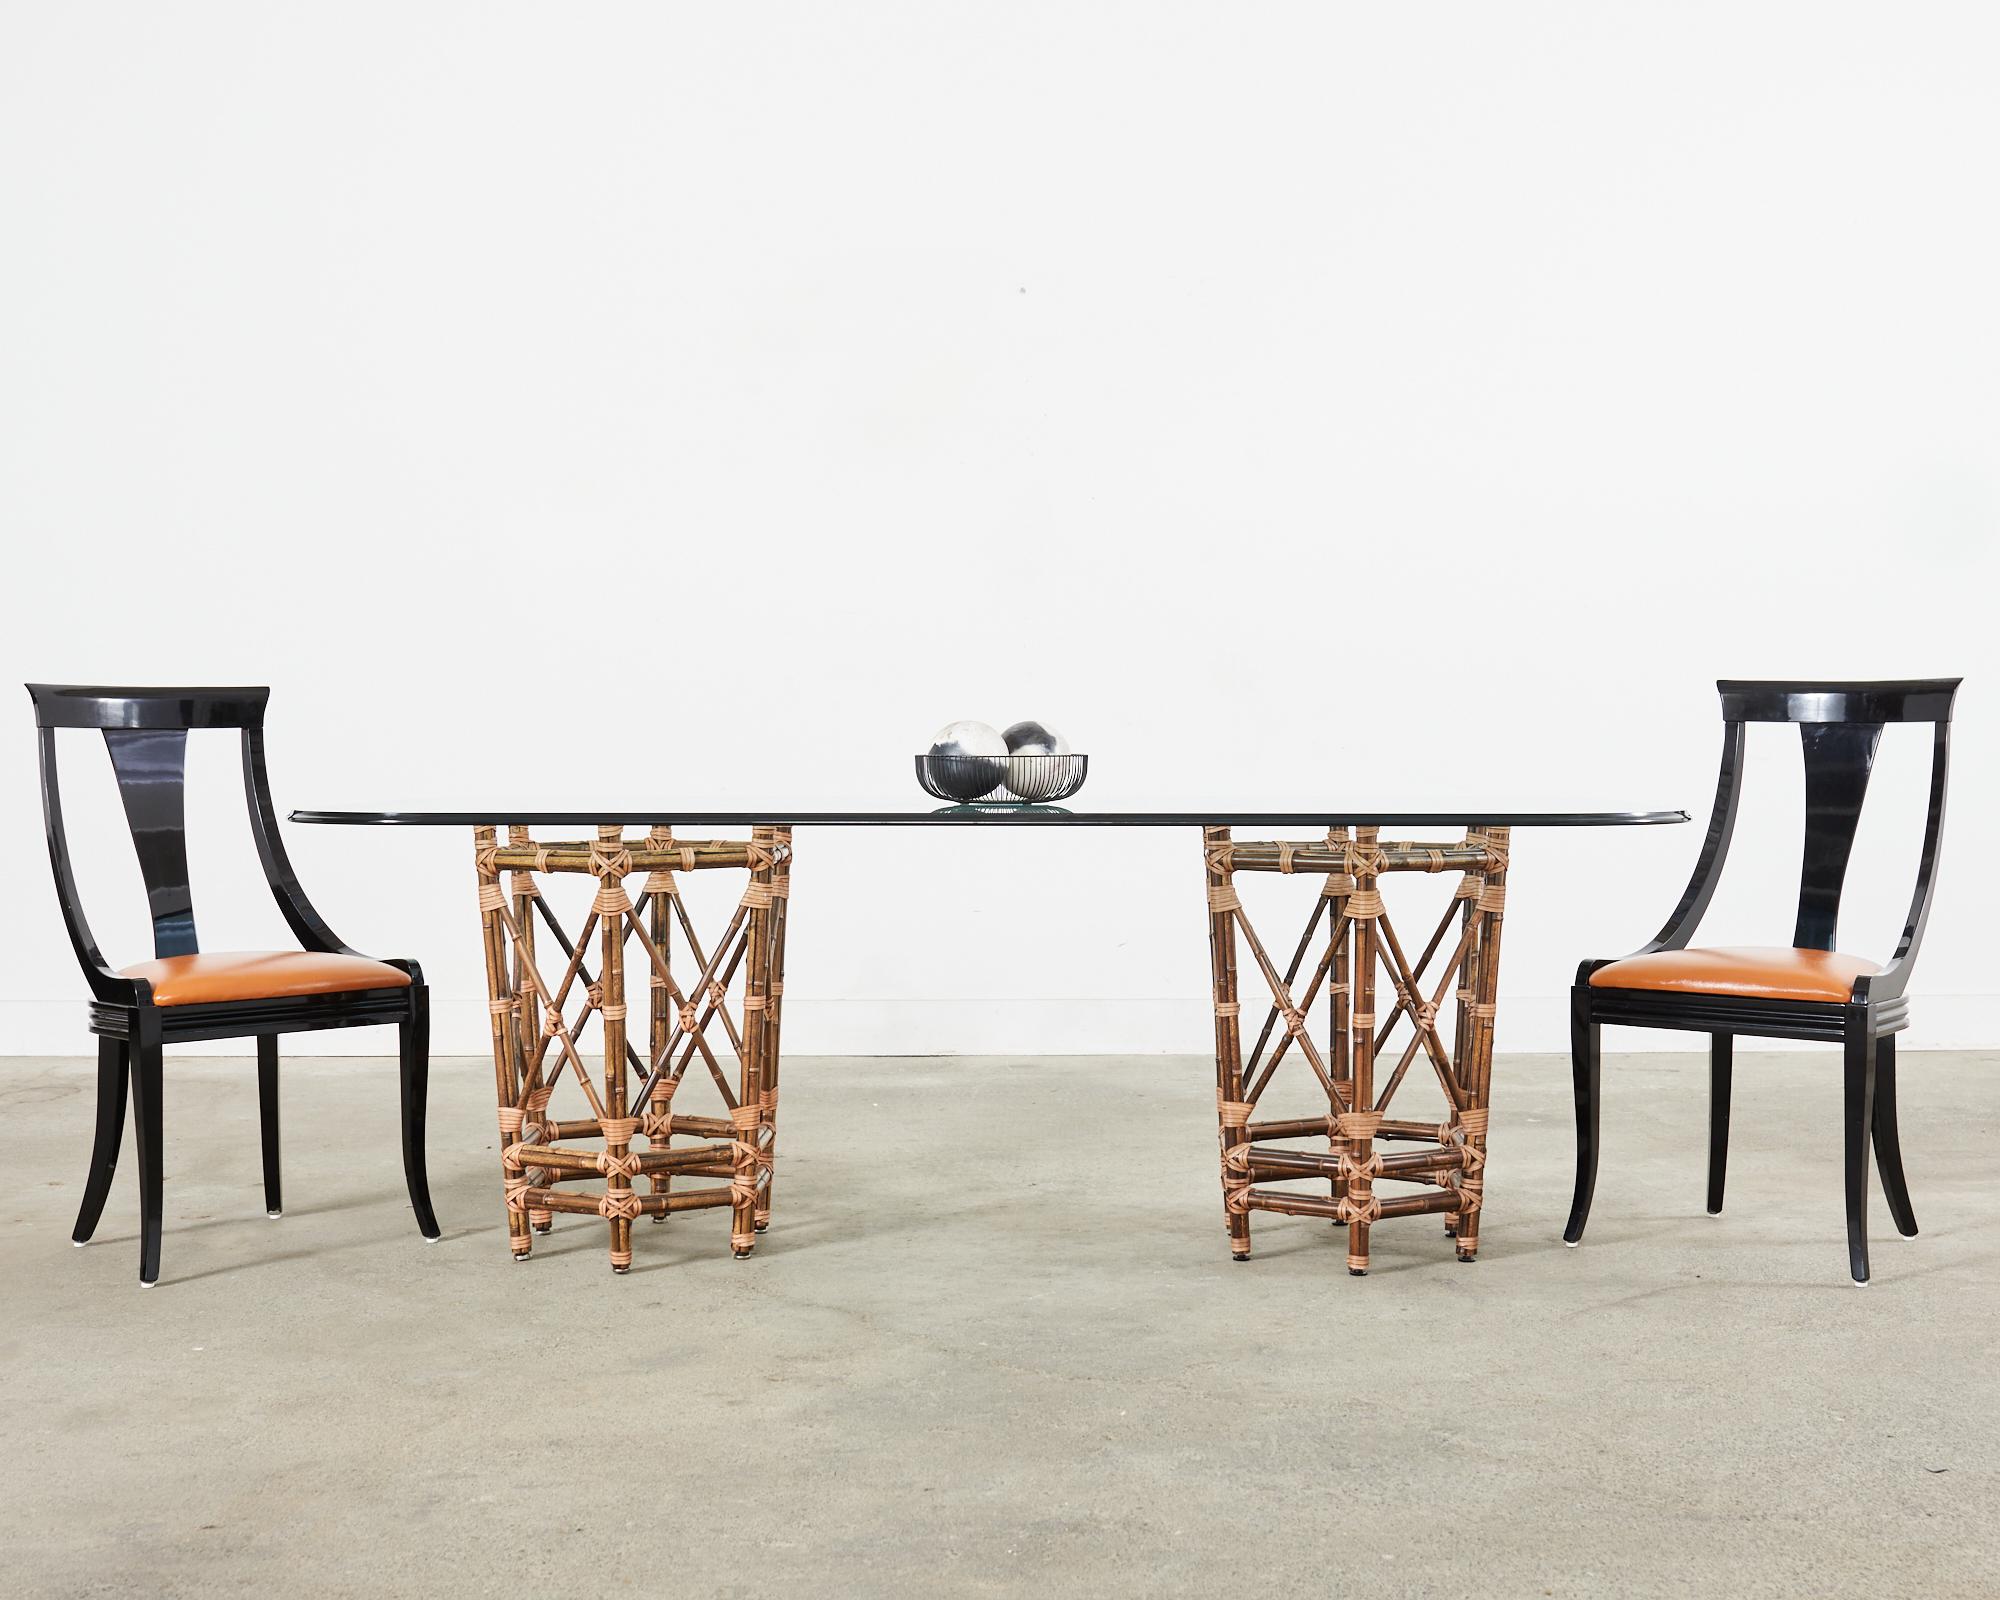 Dramatic set of six Italian gondola style dining chairs designed by Pietro Costantini in San Vito al Torre Italy. The chairs feature a black lacquer piano finish on the klismos style sculptural wood frames. The set consists of four side chairs and